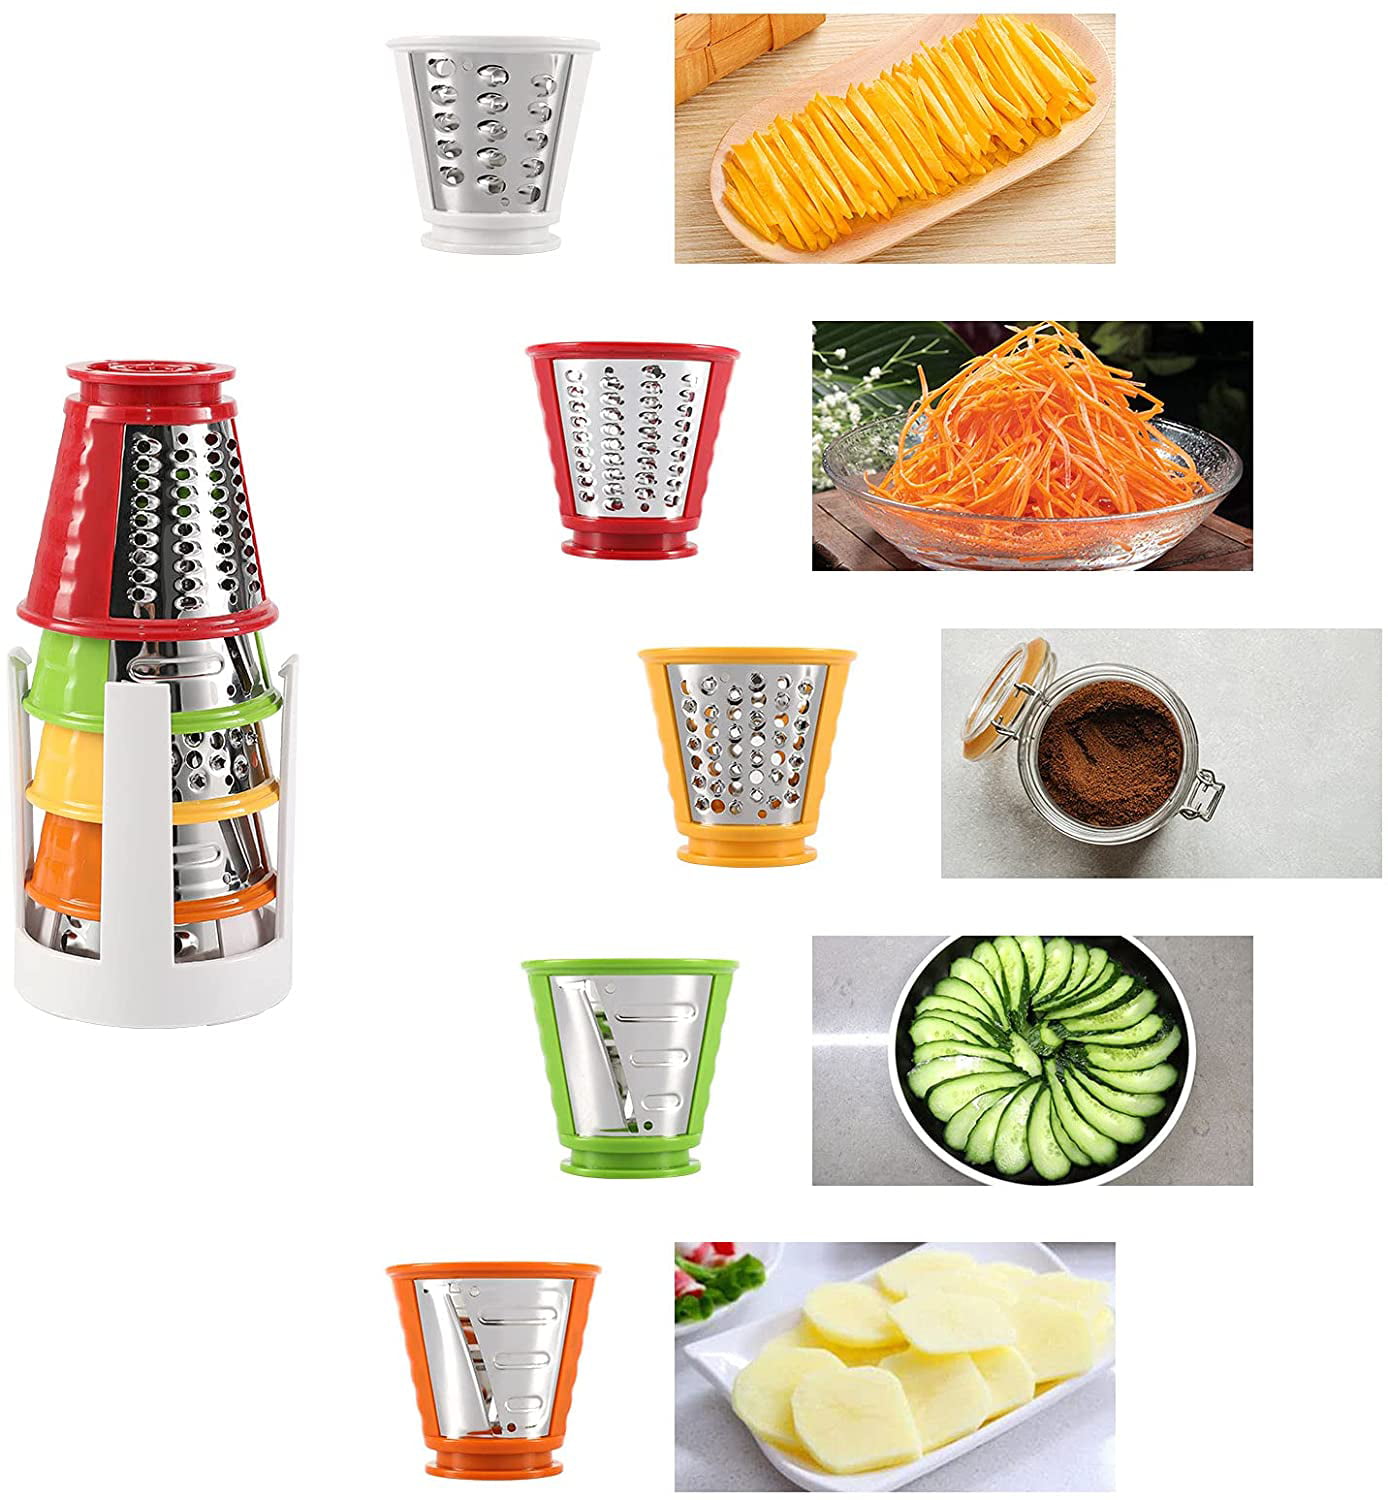  Electric Cheese Grater,250W Automatic Vegetable Chopper with 5  Attachments,Veggie Cutter Julienne Slicer Shredder for  Carrot,Potato,Fruit,Block Cheese: Home & Kitchen